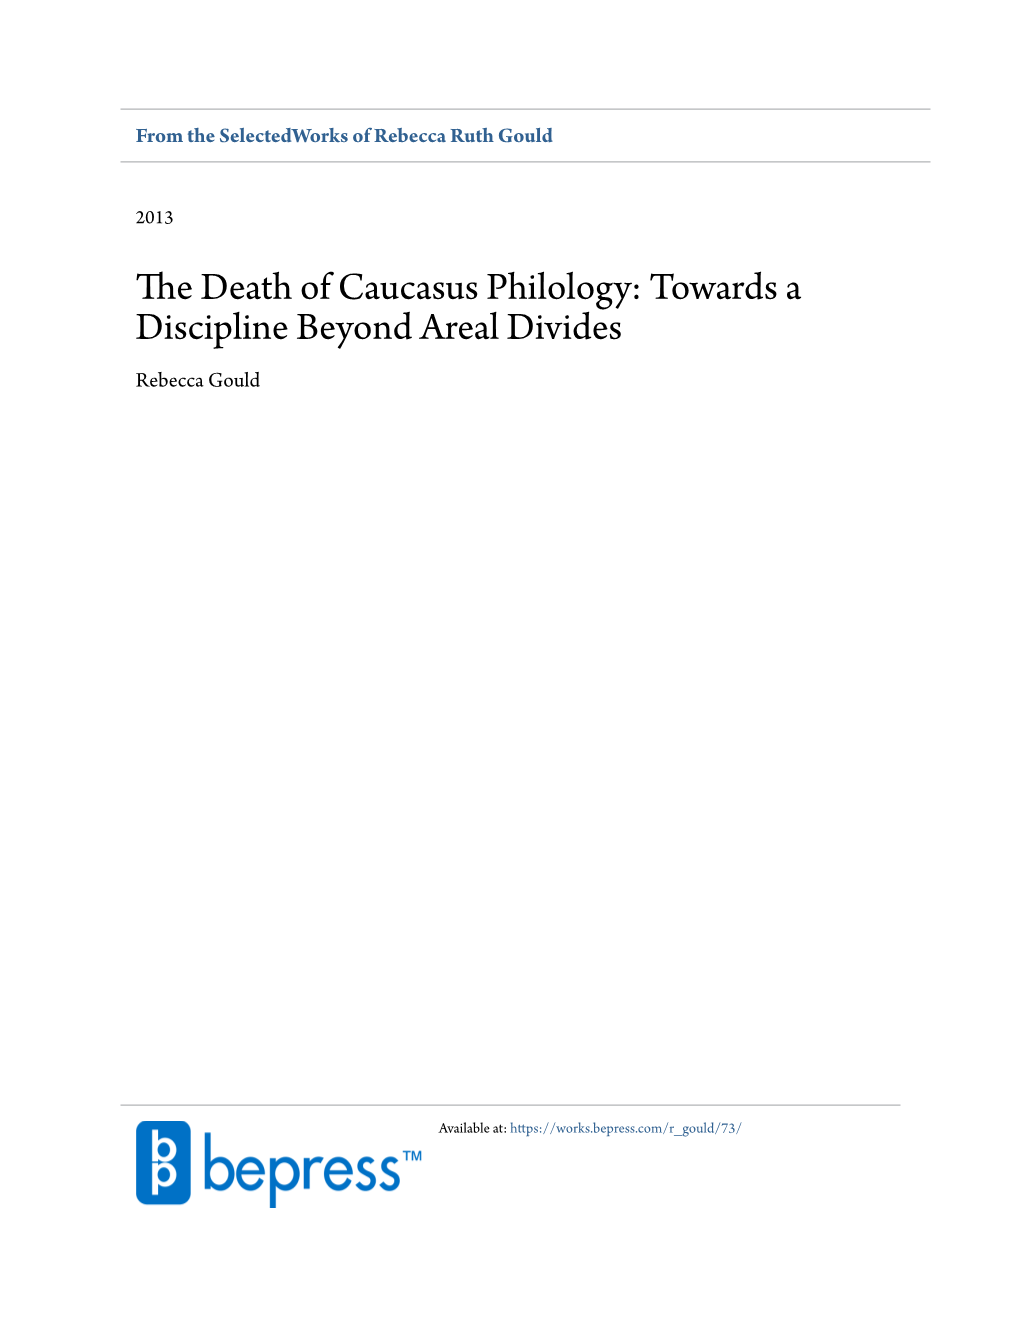 The Death of Caucasus Philology: Towards a Discipline Beyond Areal Divides*